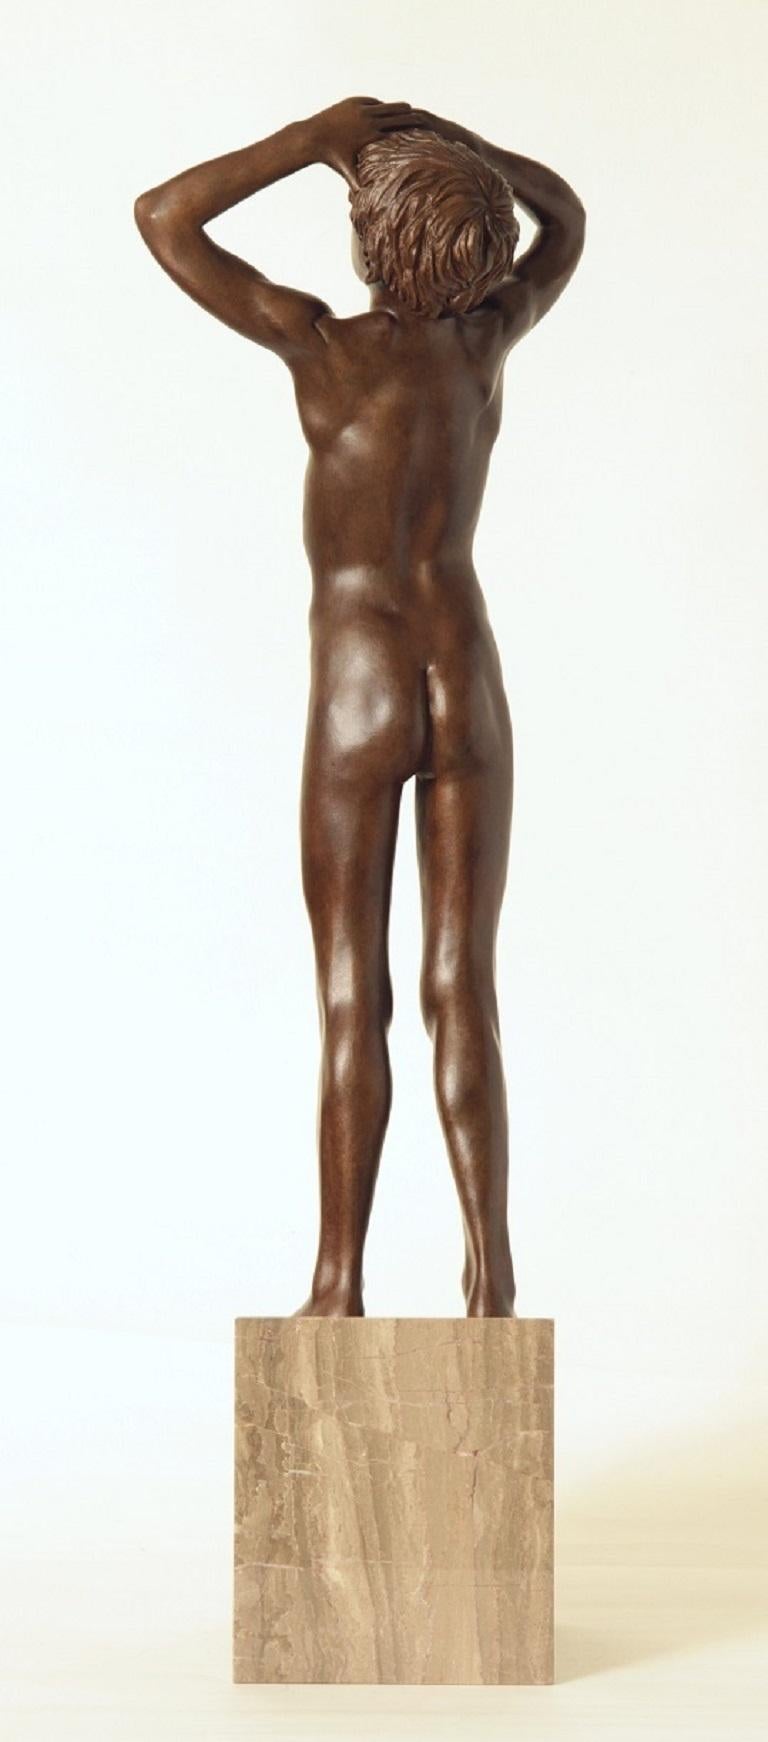 Aquila Bronze Sculpture Nude Boy Marble Stone Contemporary In Stock  - Gold Figurative Sculpture by Wim van der Kant